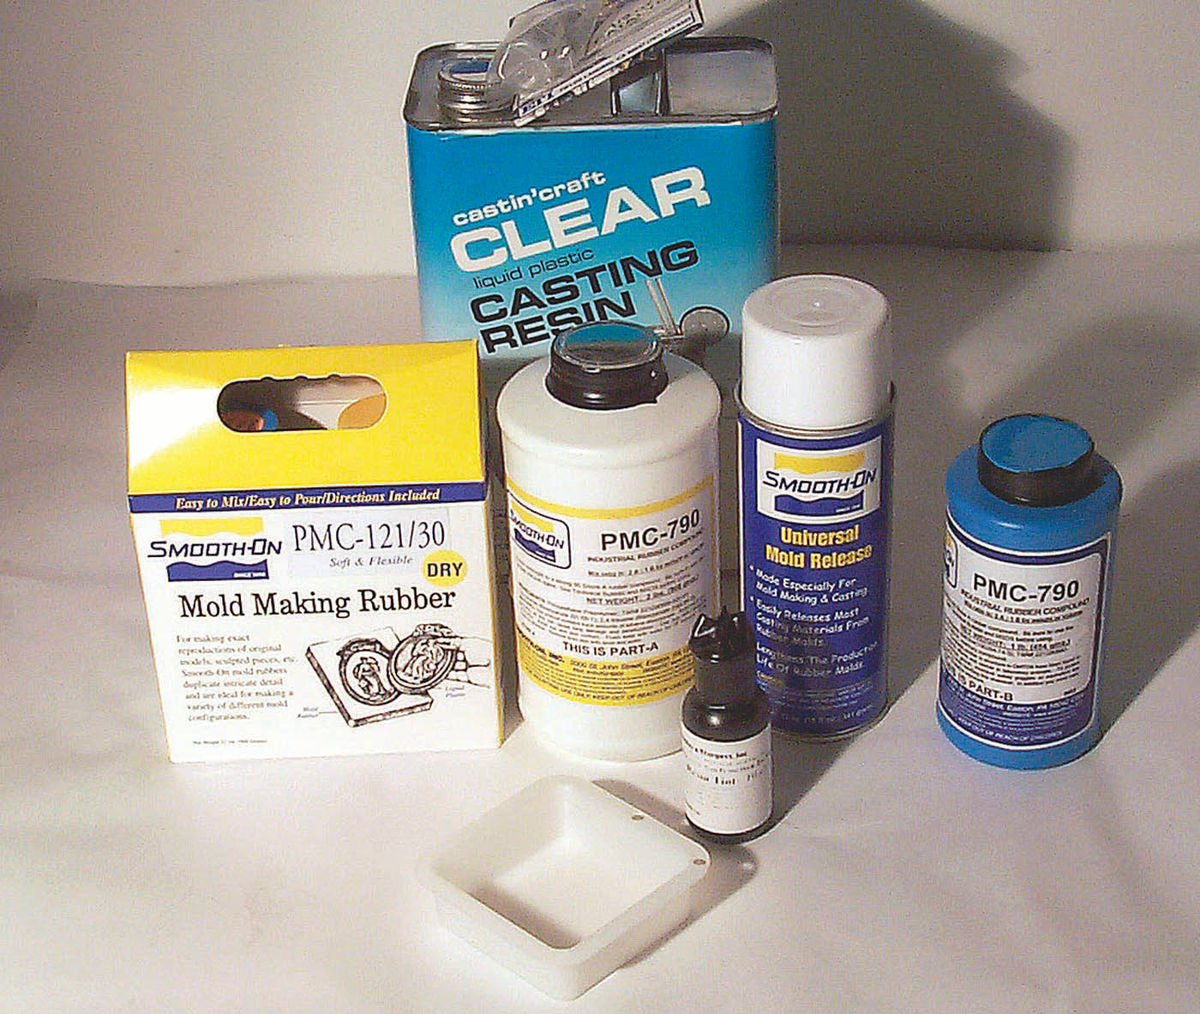 Castin' Craft Mold Release and Conditioner - resin mold release